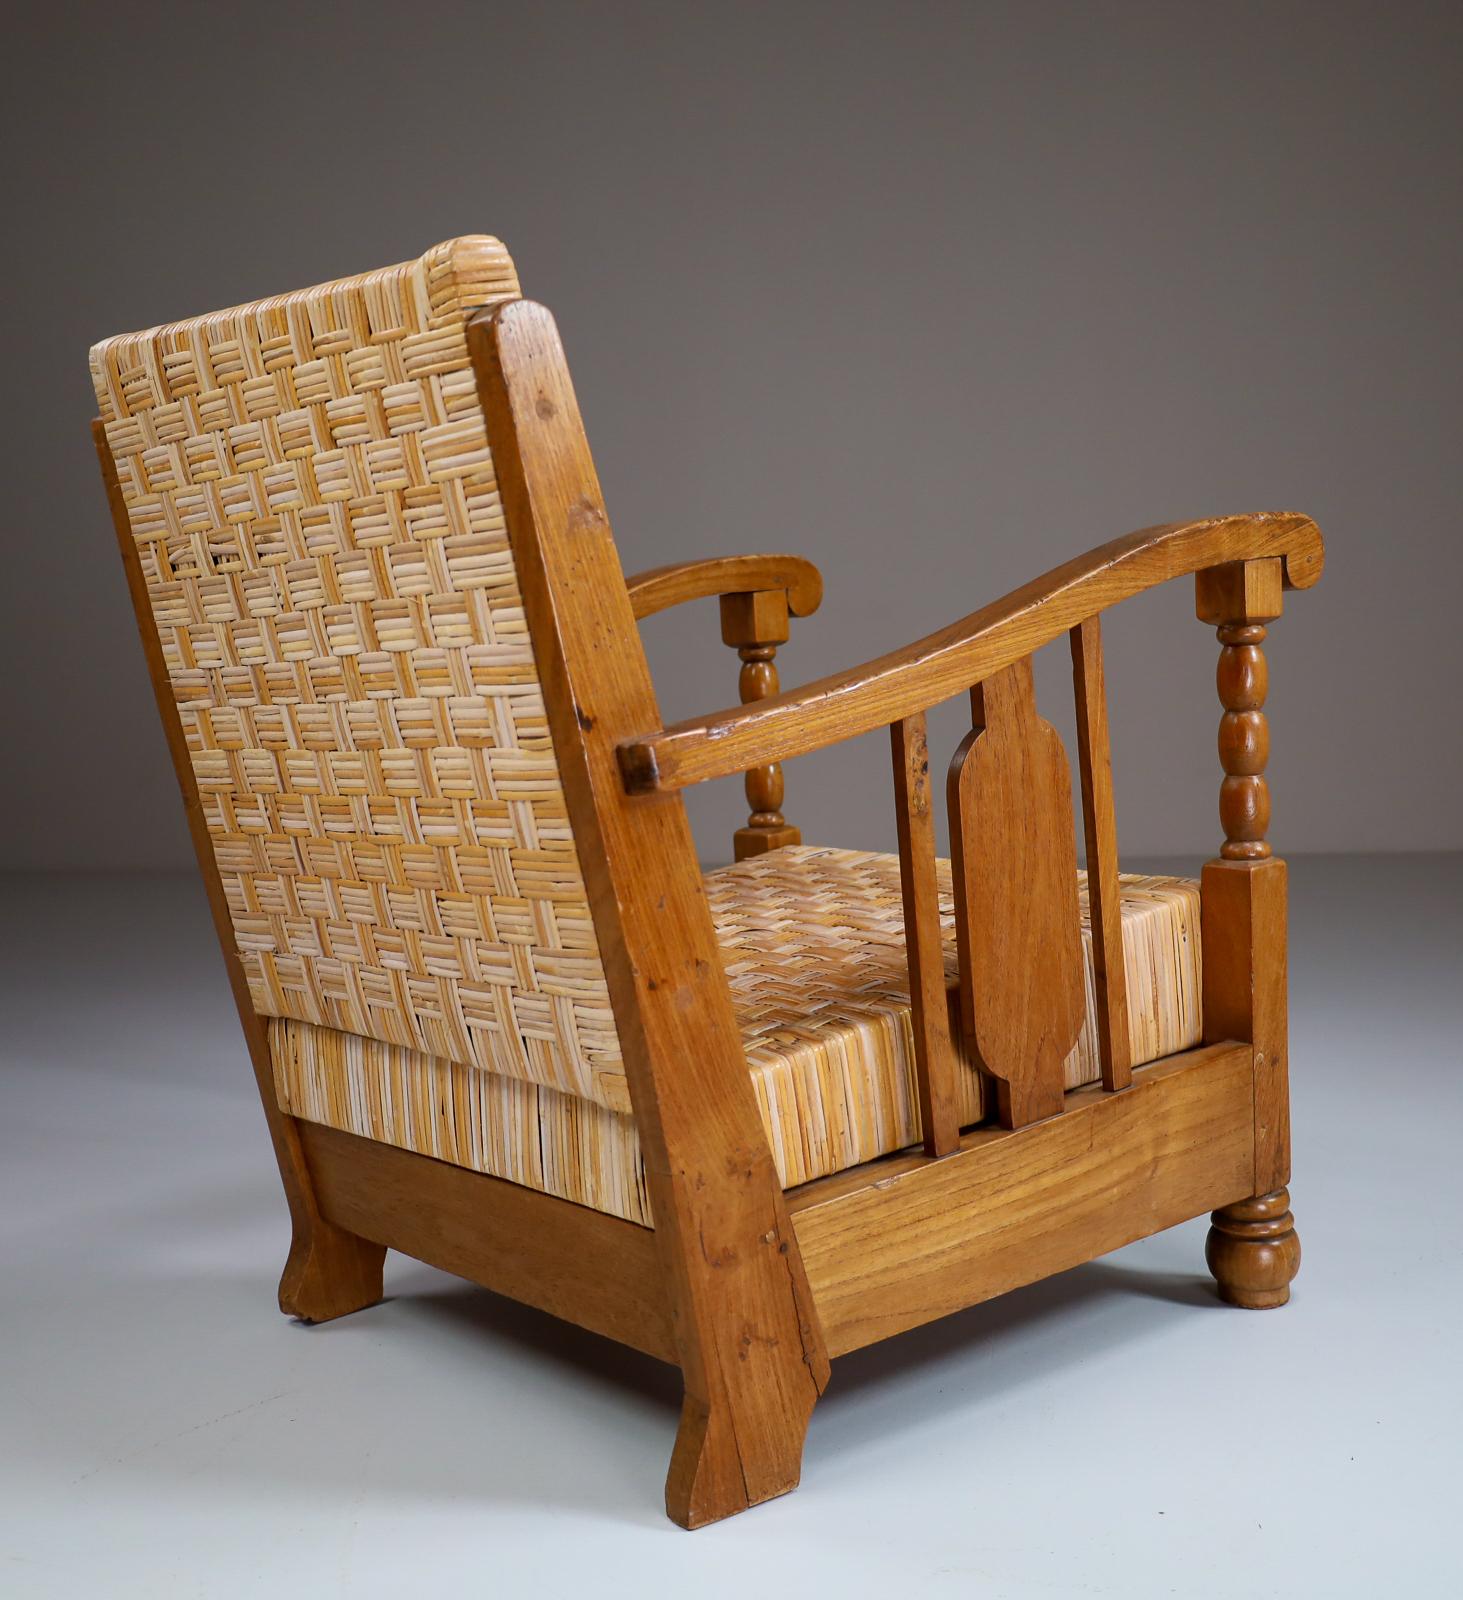 Cane British Colonial Rattan And Wood Art Deco Lounge Chair, India 1920s For Sale